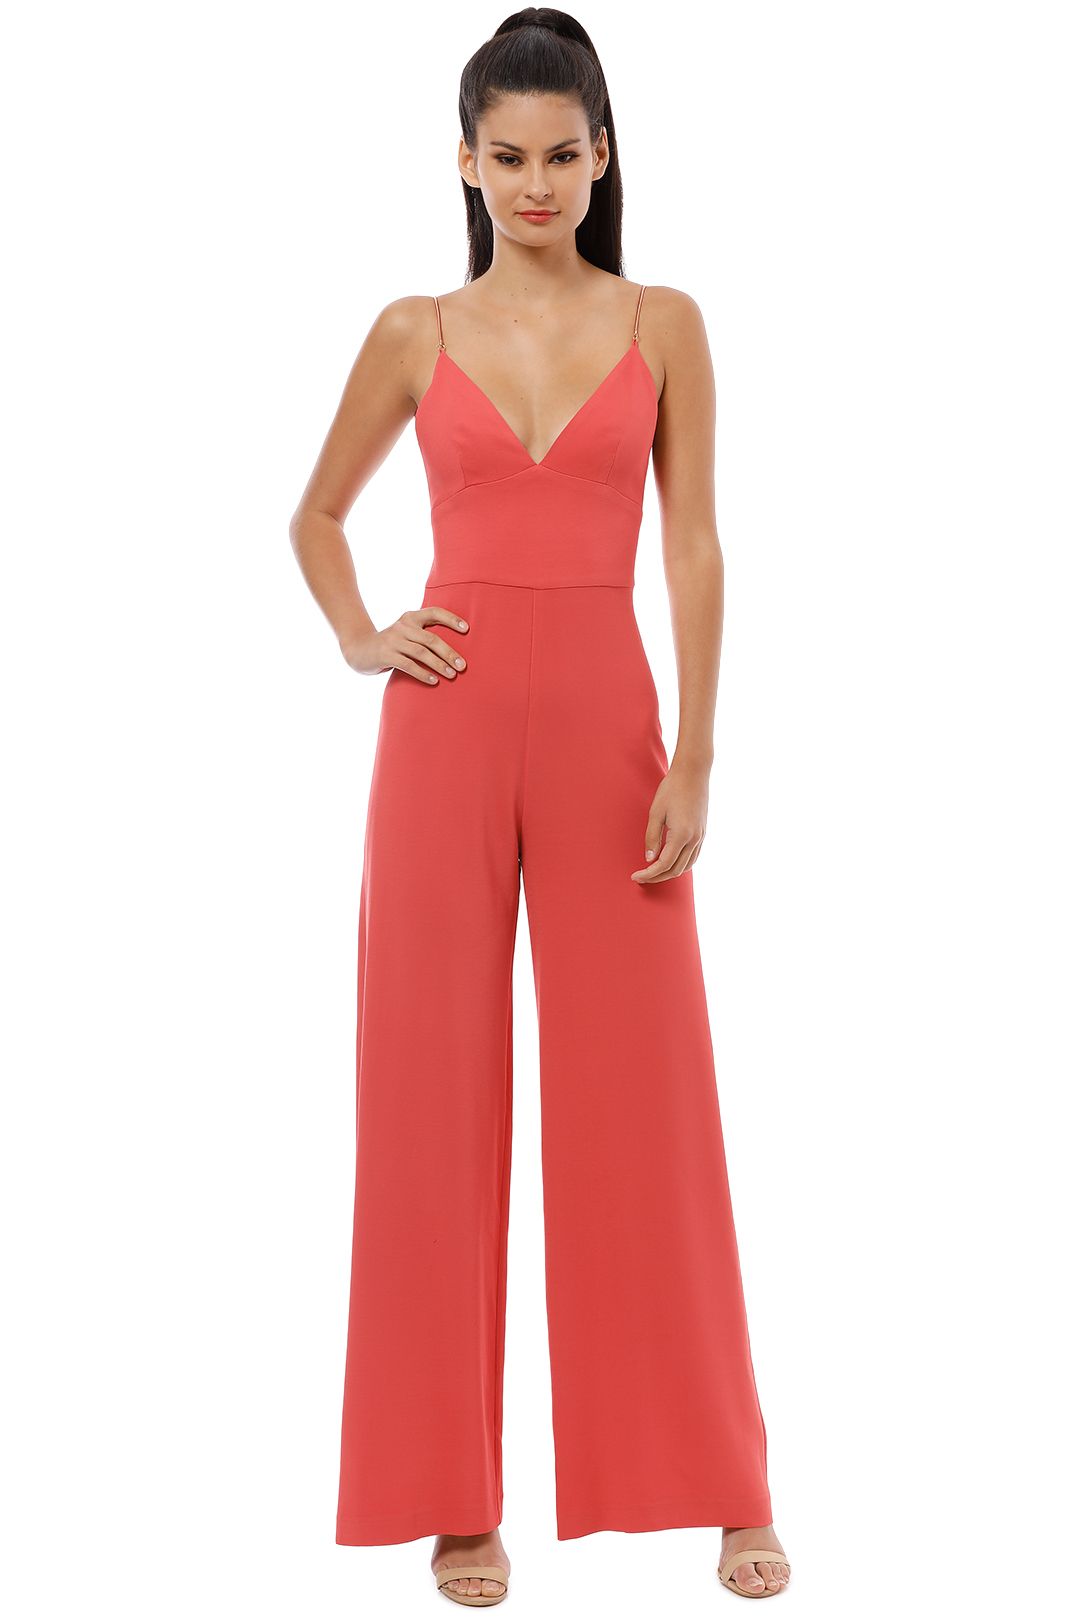 Ginger and Smart - Drift Jumpsuit - Coral - Front